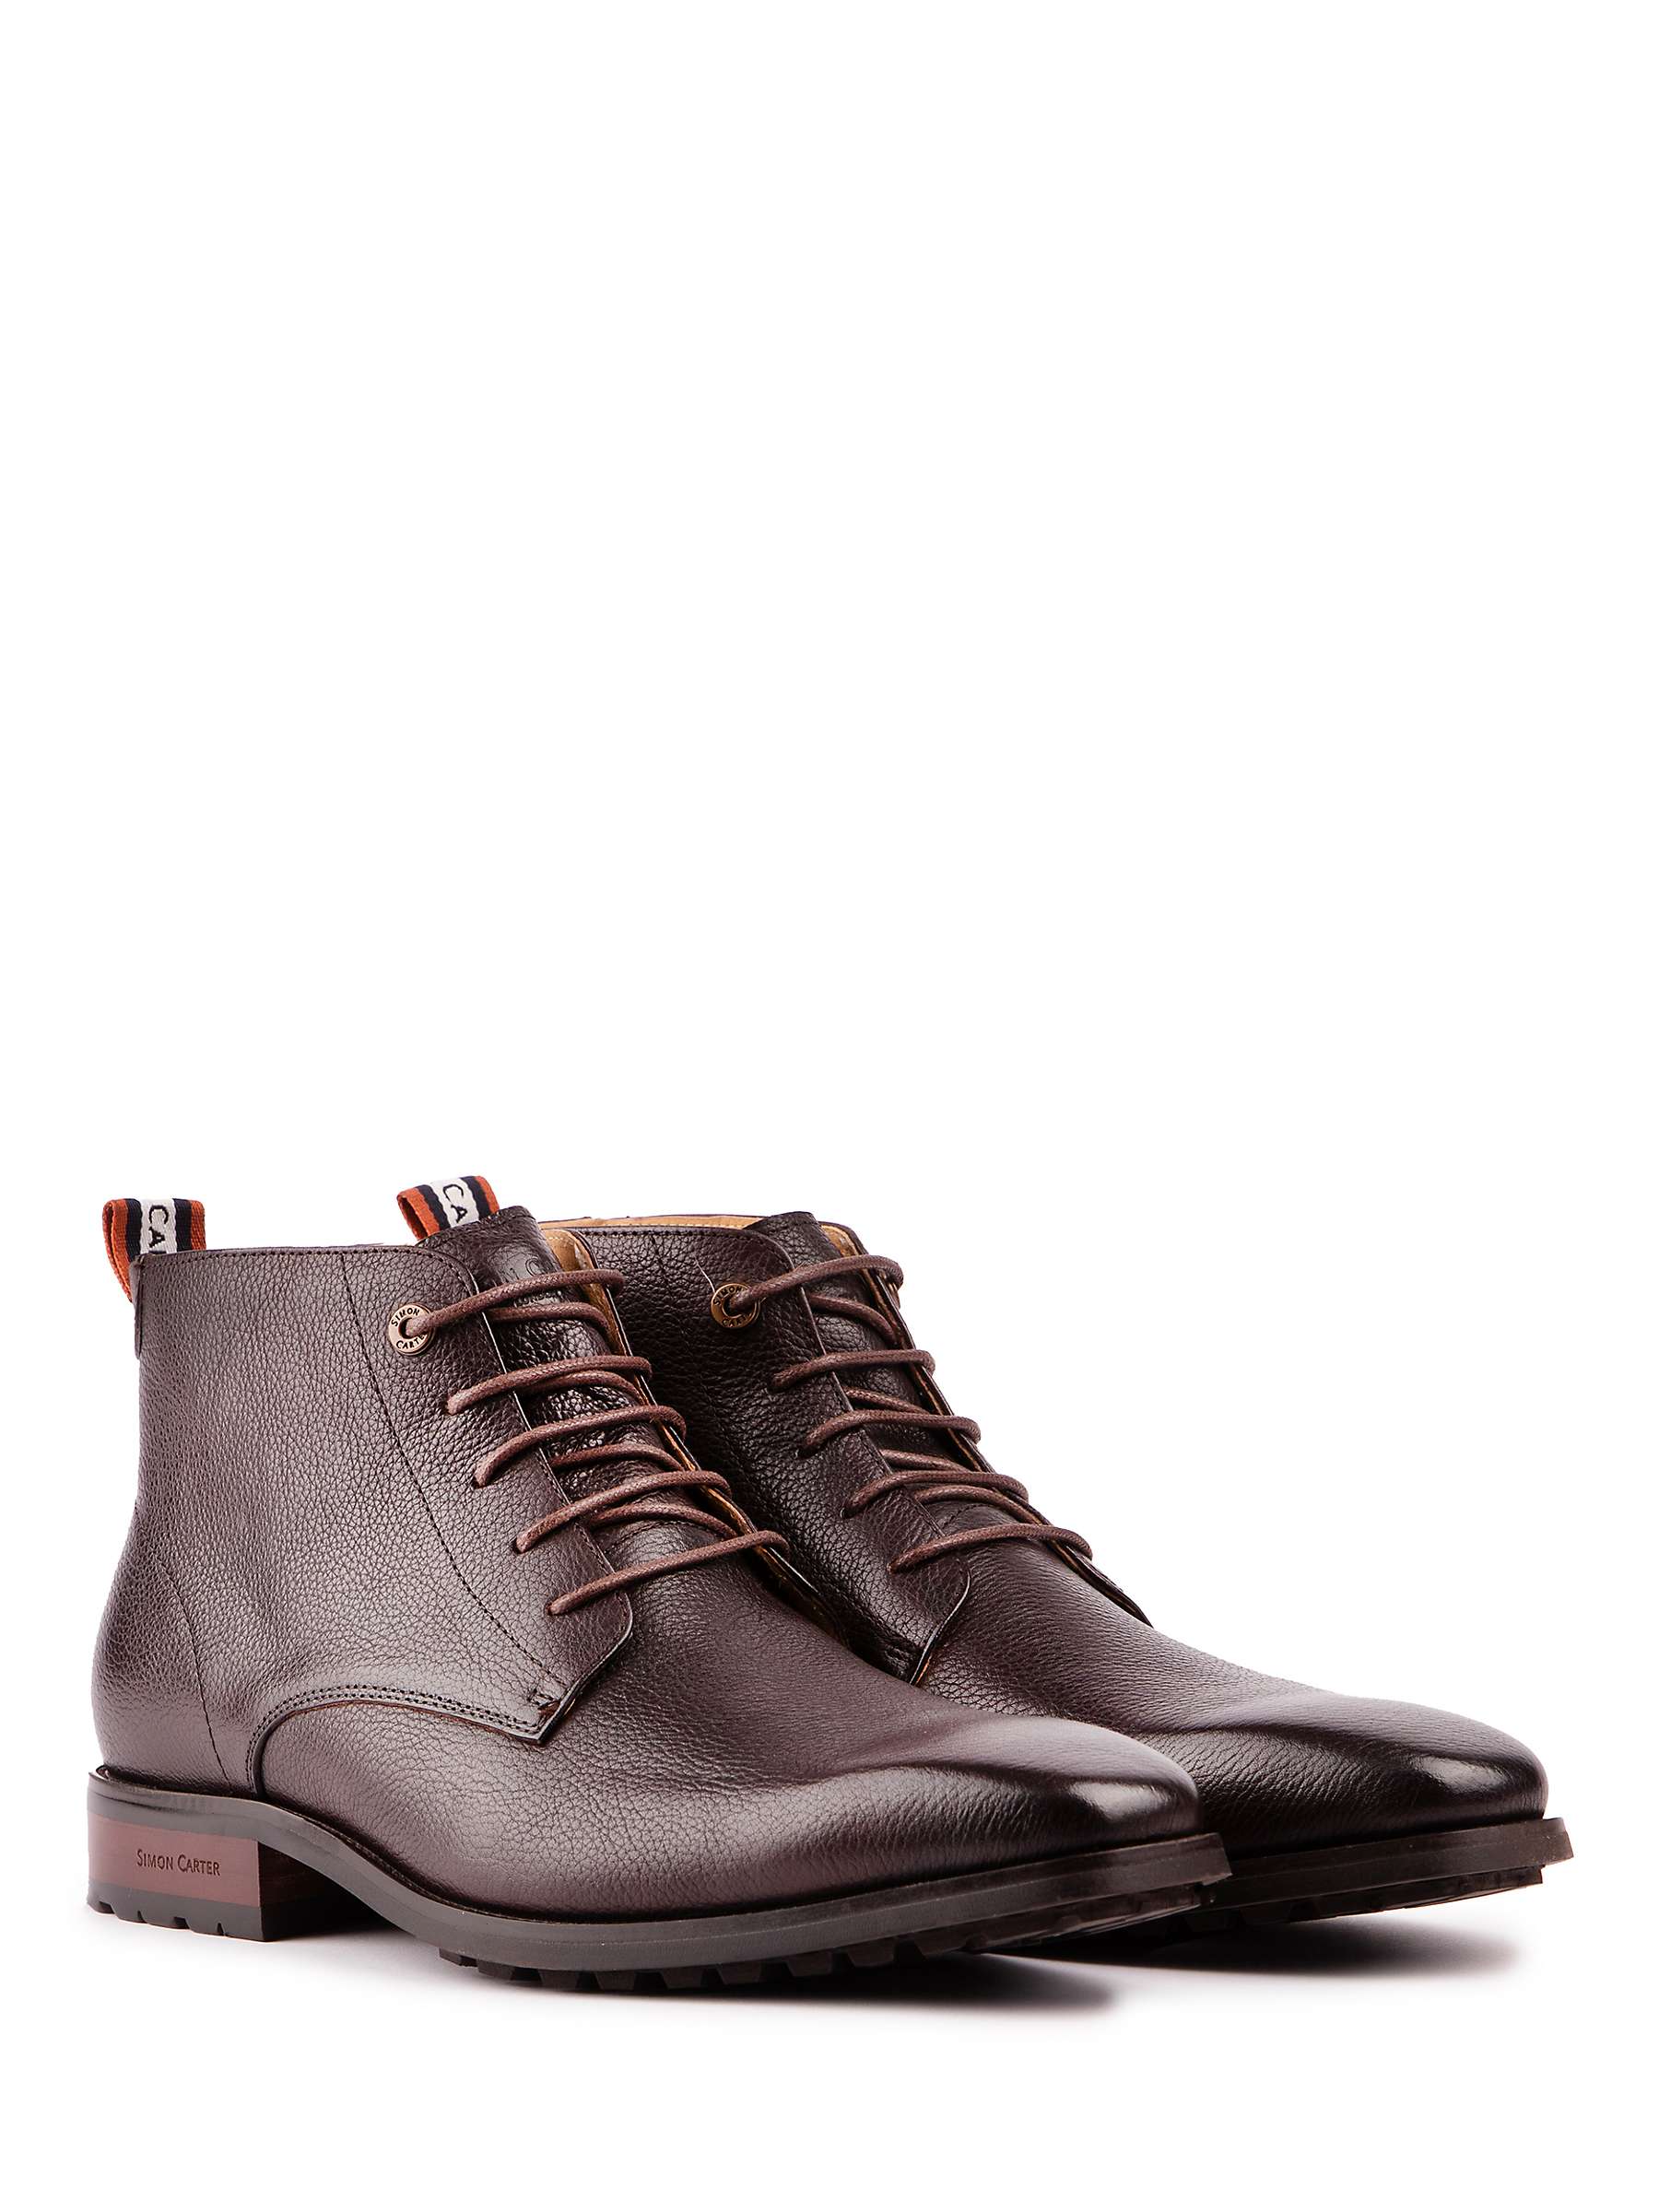 Buy Simon Carter Daisy Leather Chukka Boots, Brown Online at johnlewis.com